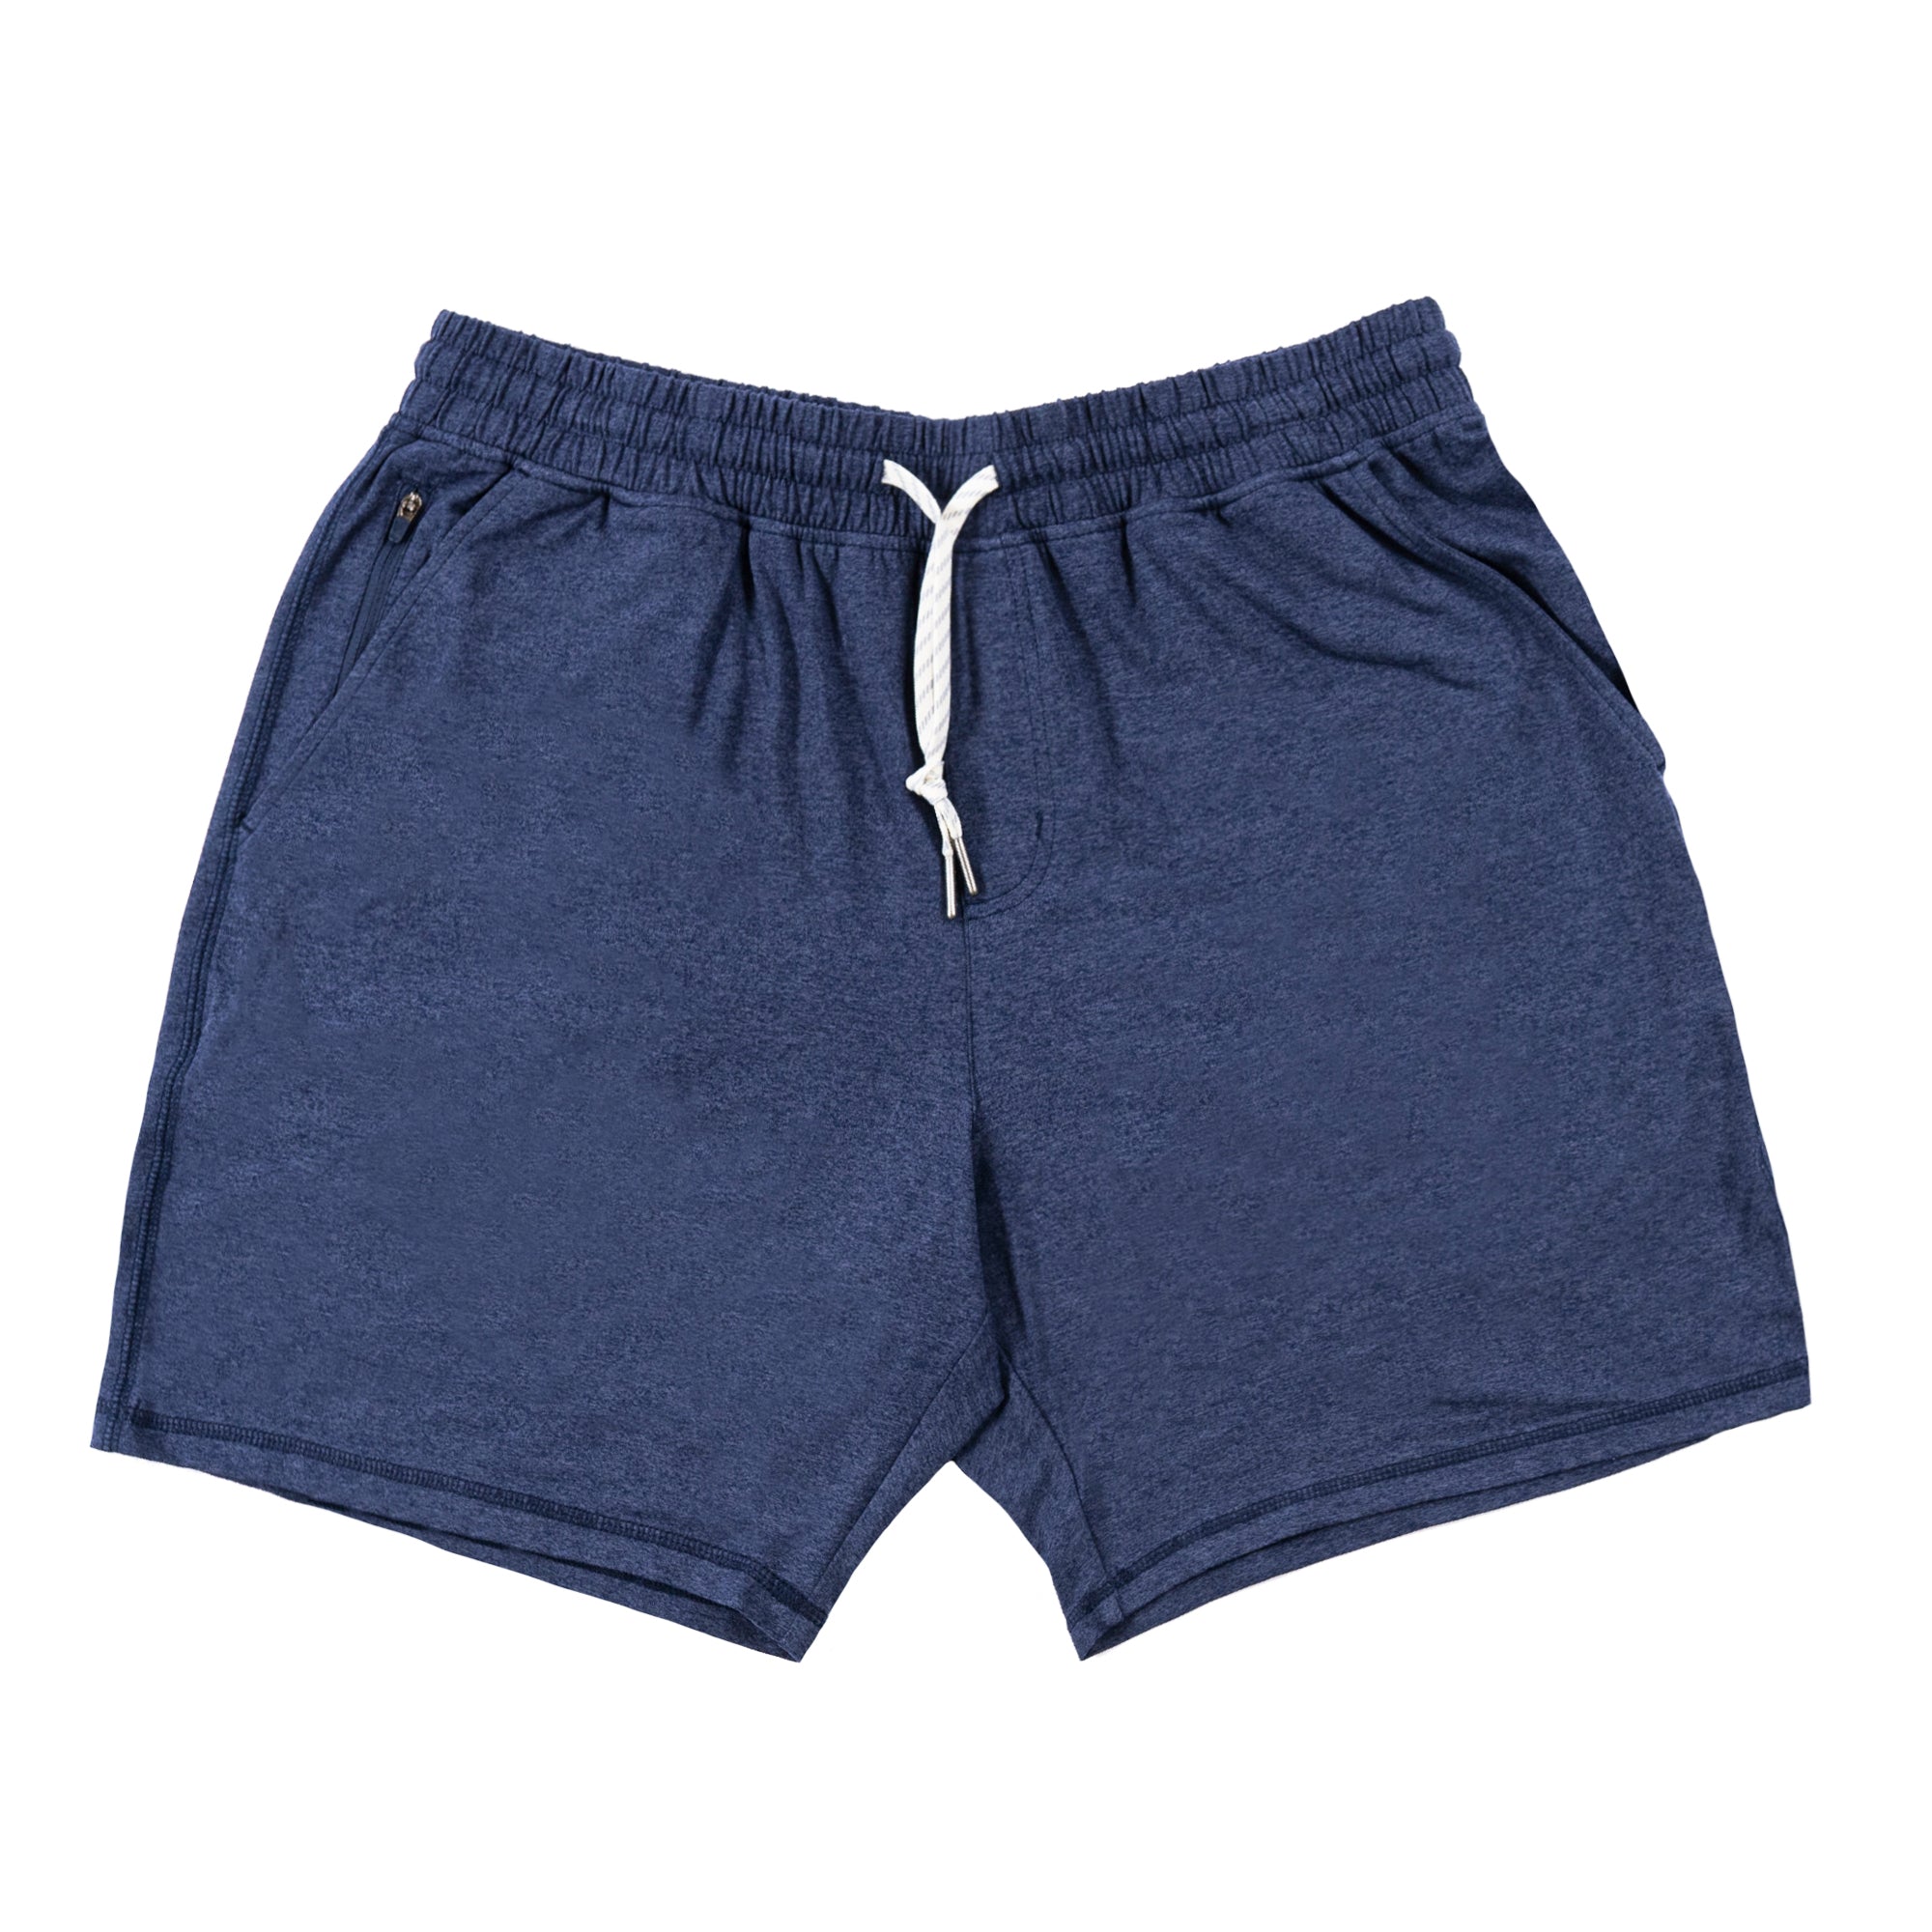 Buy heather-ink-blue MENS DAWN TO DUSK JOGGER SHORTS